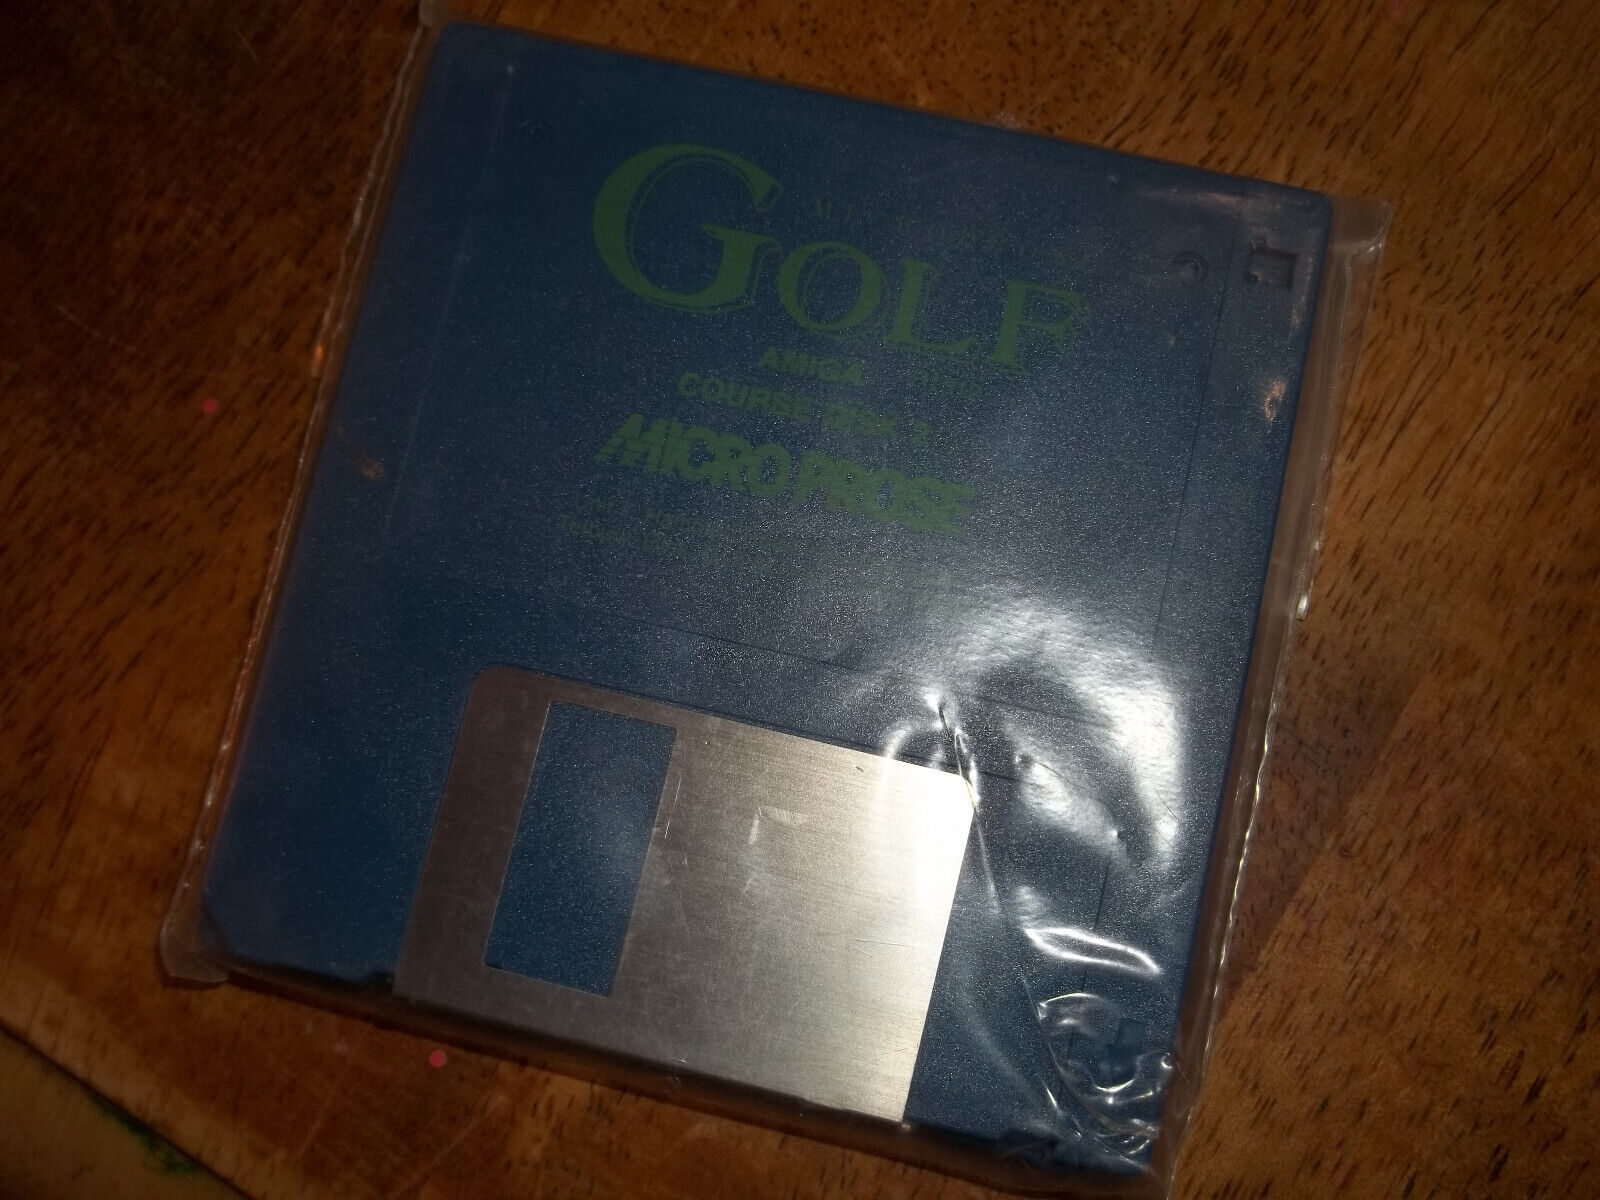 Vintage Commodore Amiga Game Disk - Microprose Golf, Disc 1, 2 ,3 Disks